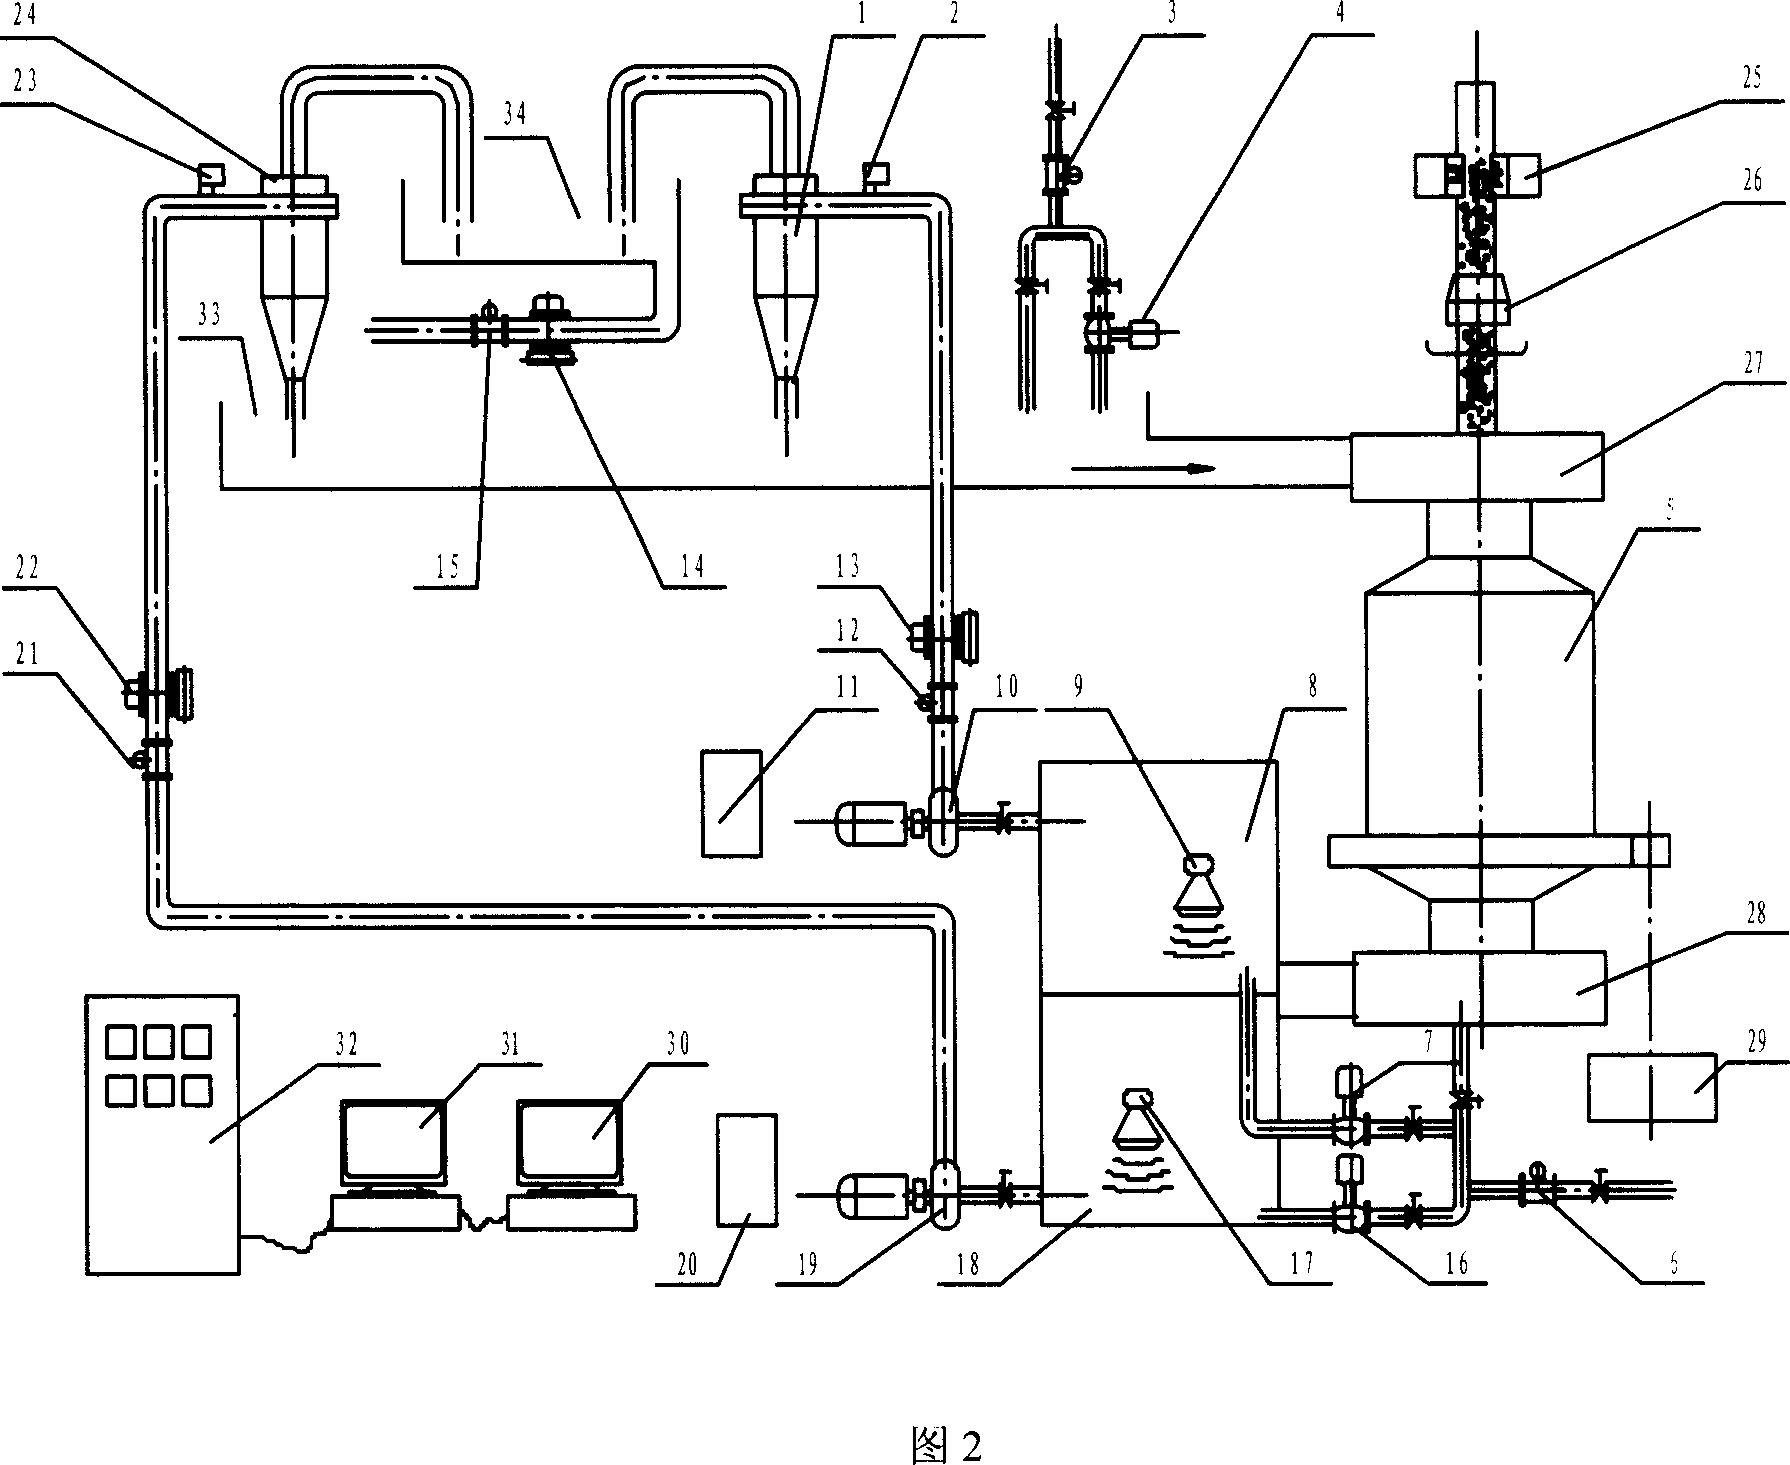 Closed circuit grinding classification system consisting of cyclone and grate discharge ball mill